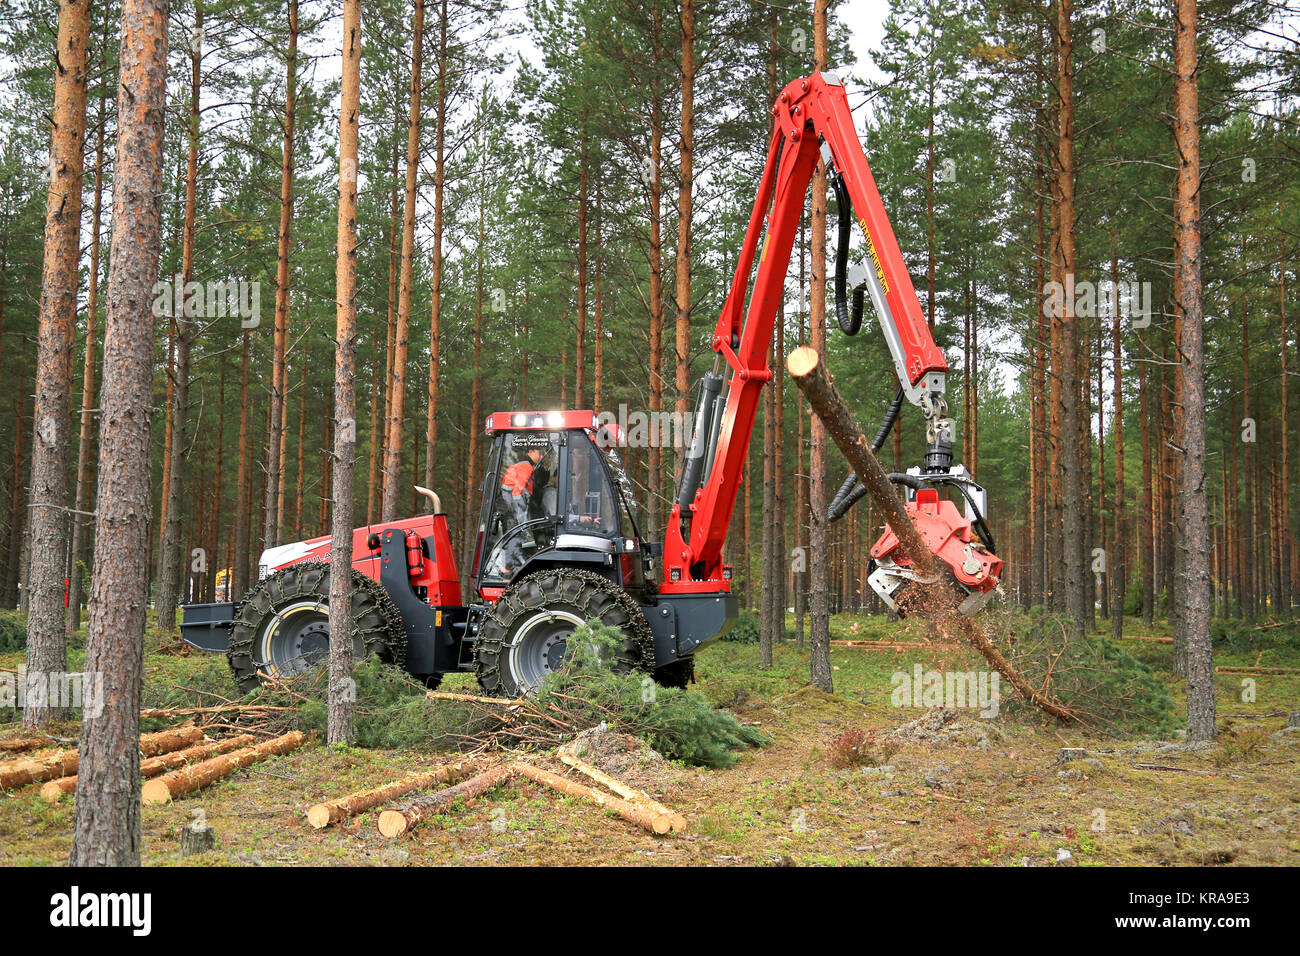 JAMSA, FINLAND - AUGUST 30, 2014:  Nisula N5 forestry harvester is thinning pine forest at a work demo by Nisula in FinnMETKO 2014. Stock Photo